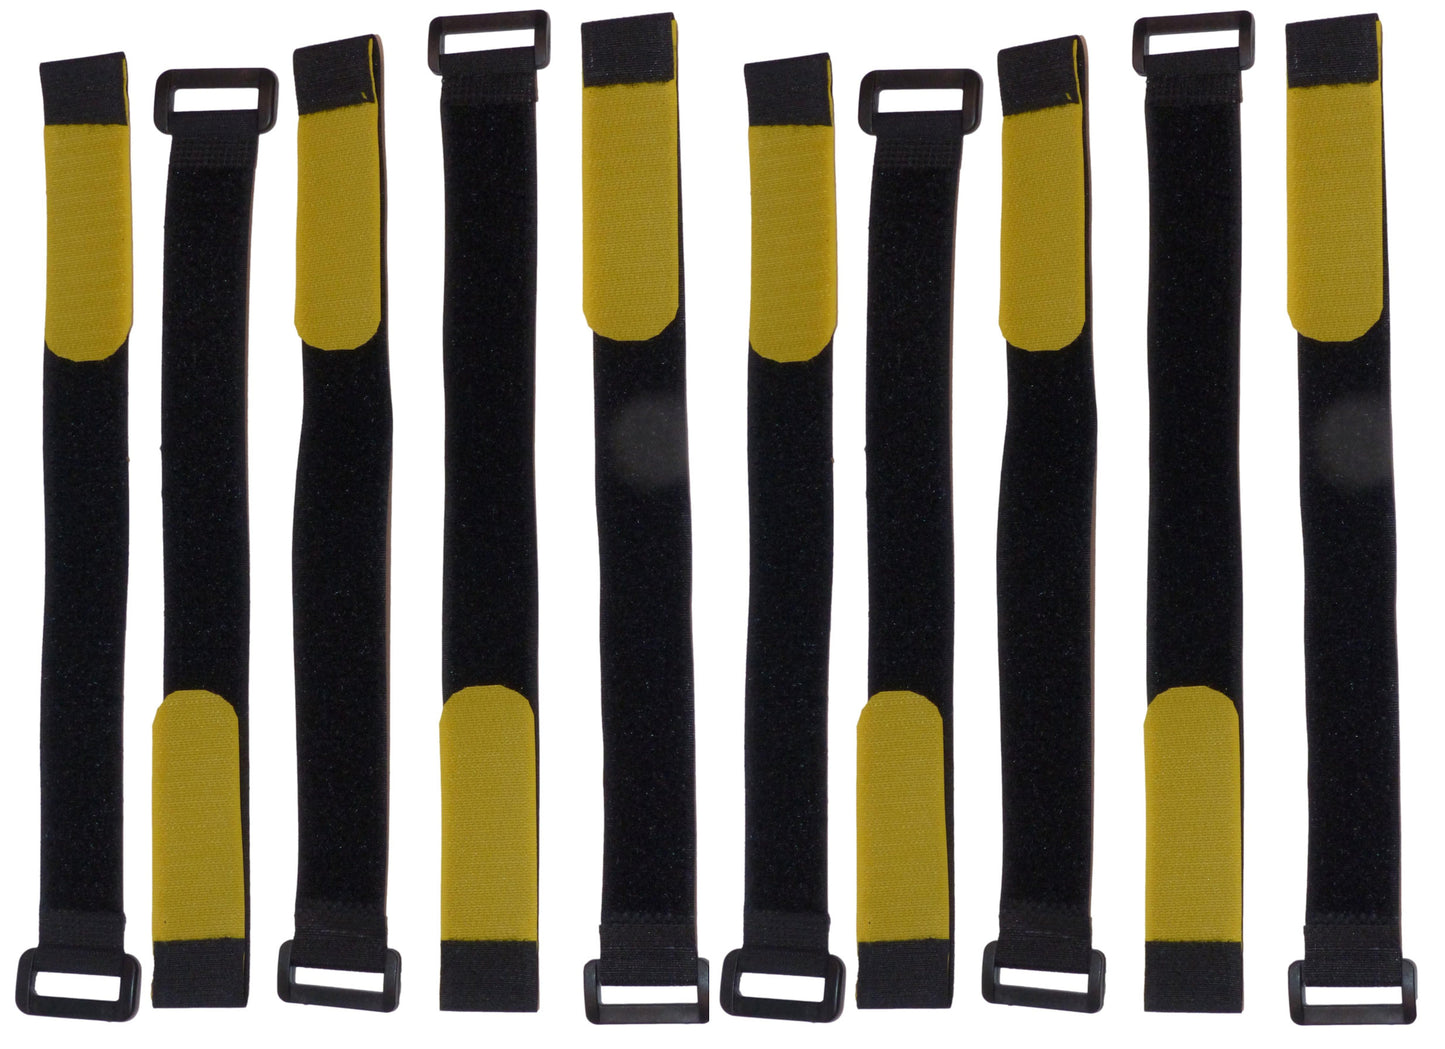 25mm Hook and Loop Cinch Straps in Black, Yellow End (Pack of 10)